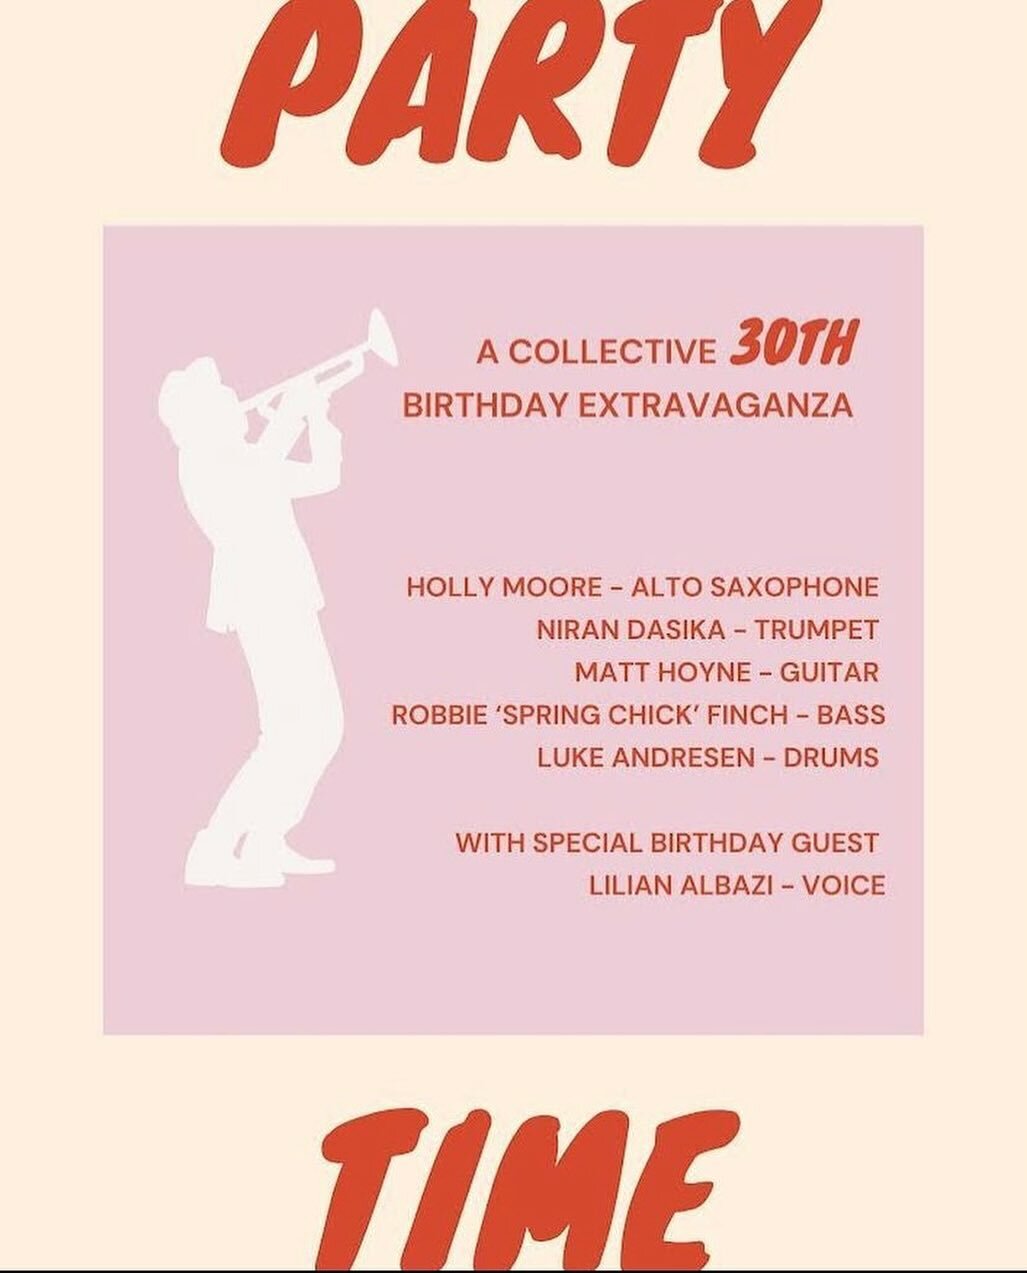 Help me alleviate some of the existential dread 😱 around turning 30 a few weeks ago by celebrating a collective 30th birthday party organised by the one and only @hollyyymoore Next Wednesday the 29th (a cruel date to choose) at @thejazzlab featuring